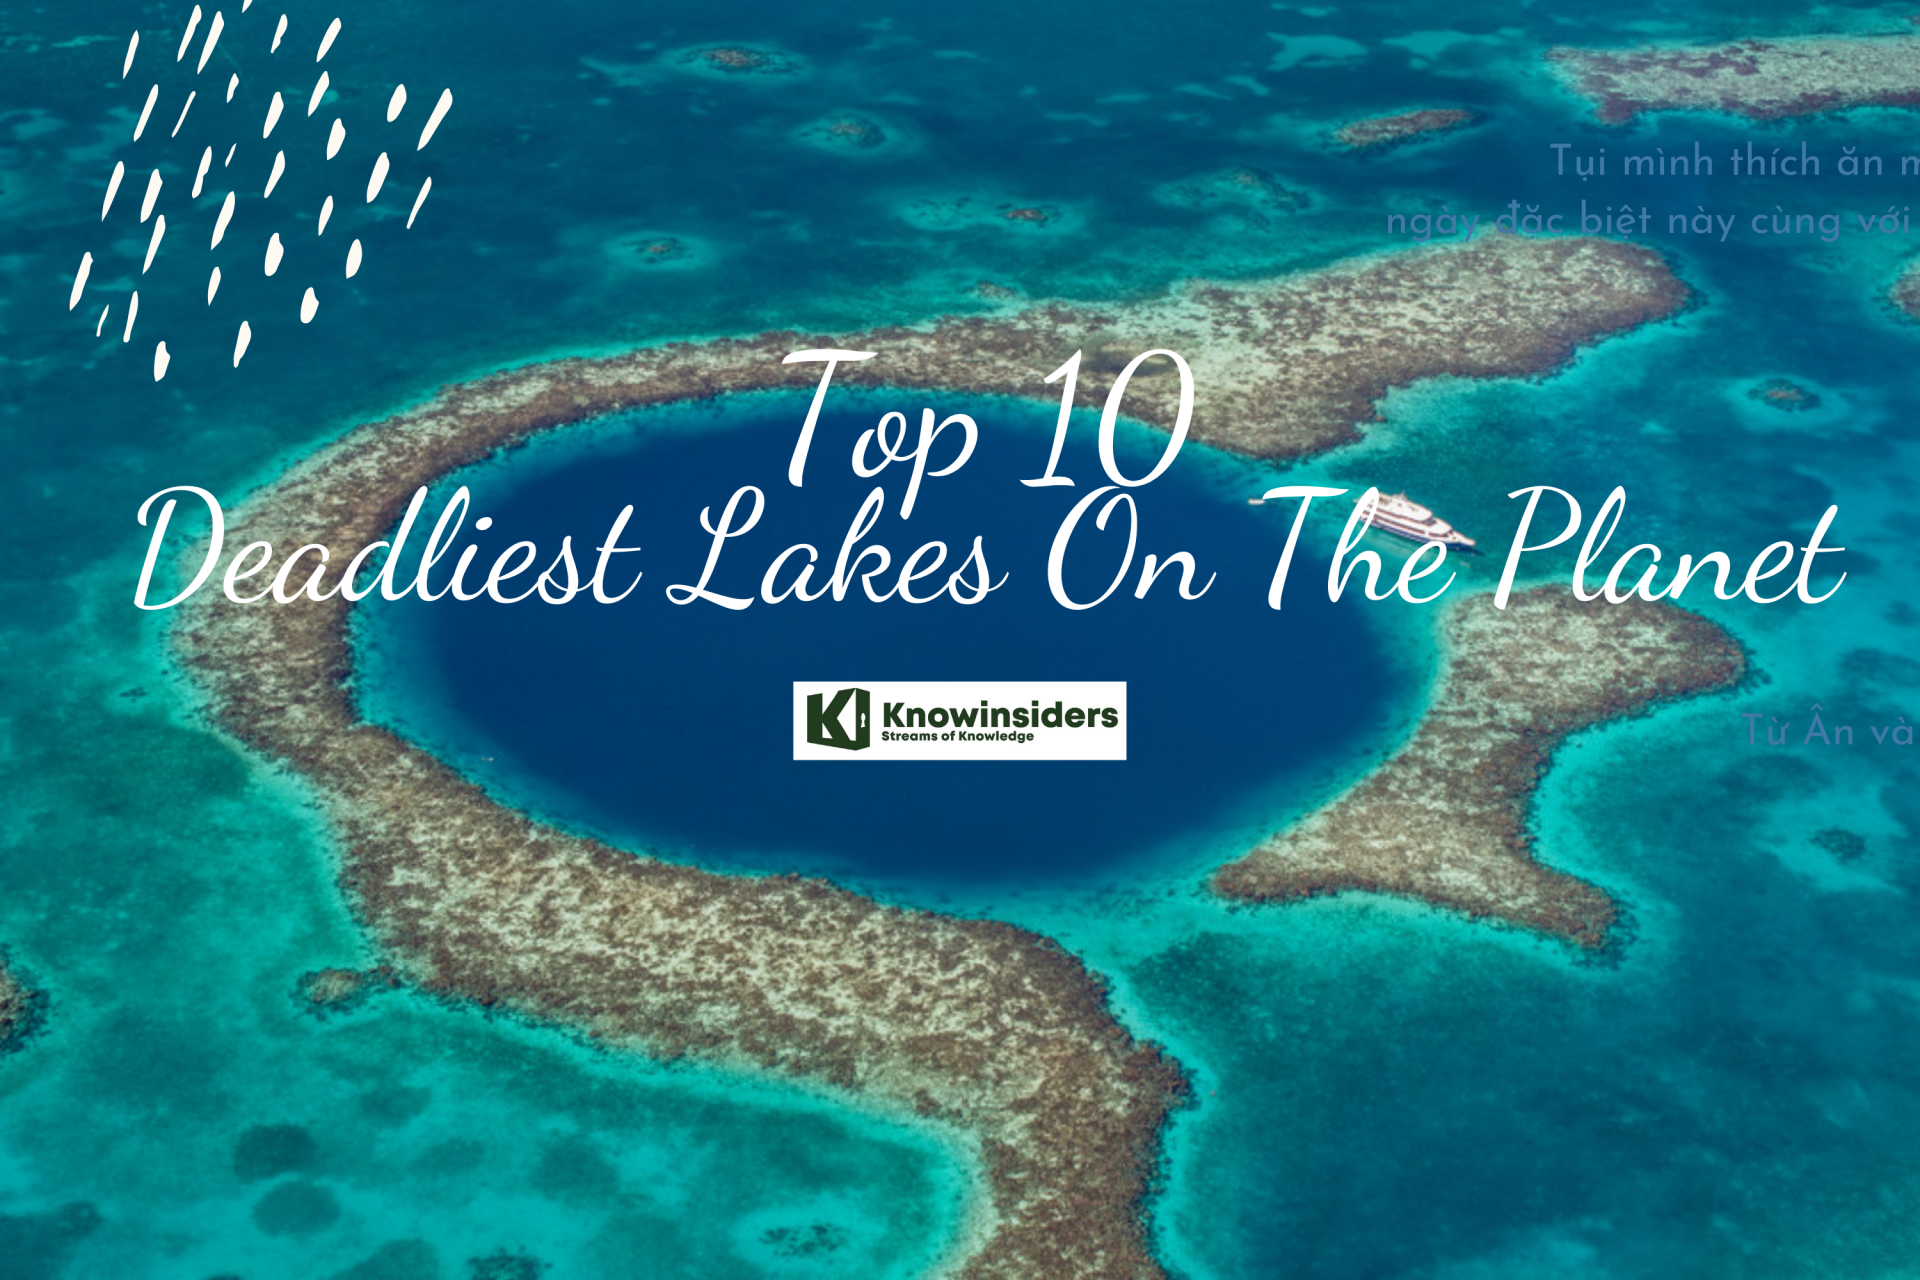 Top 10 Deadliest Lakes On The Planet